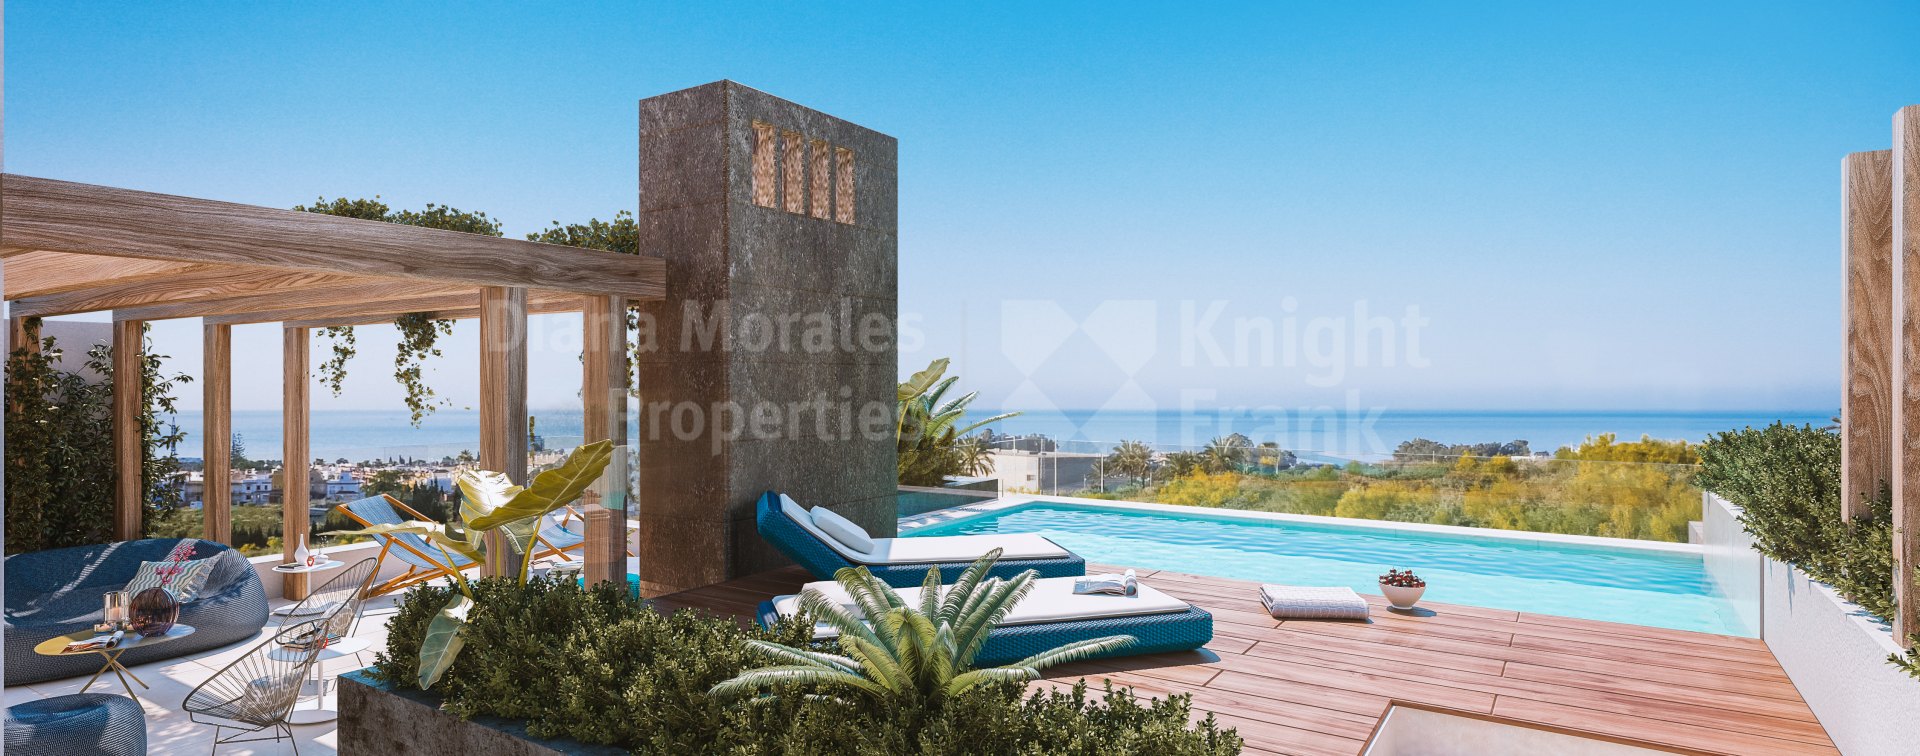 Rio Real, Semi-detached house with stunning views in gated community